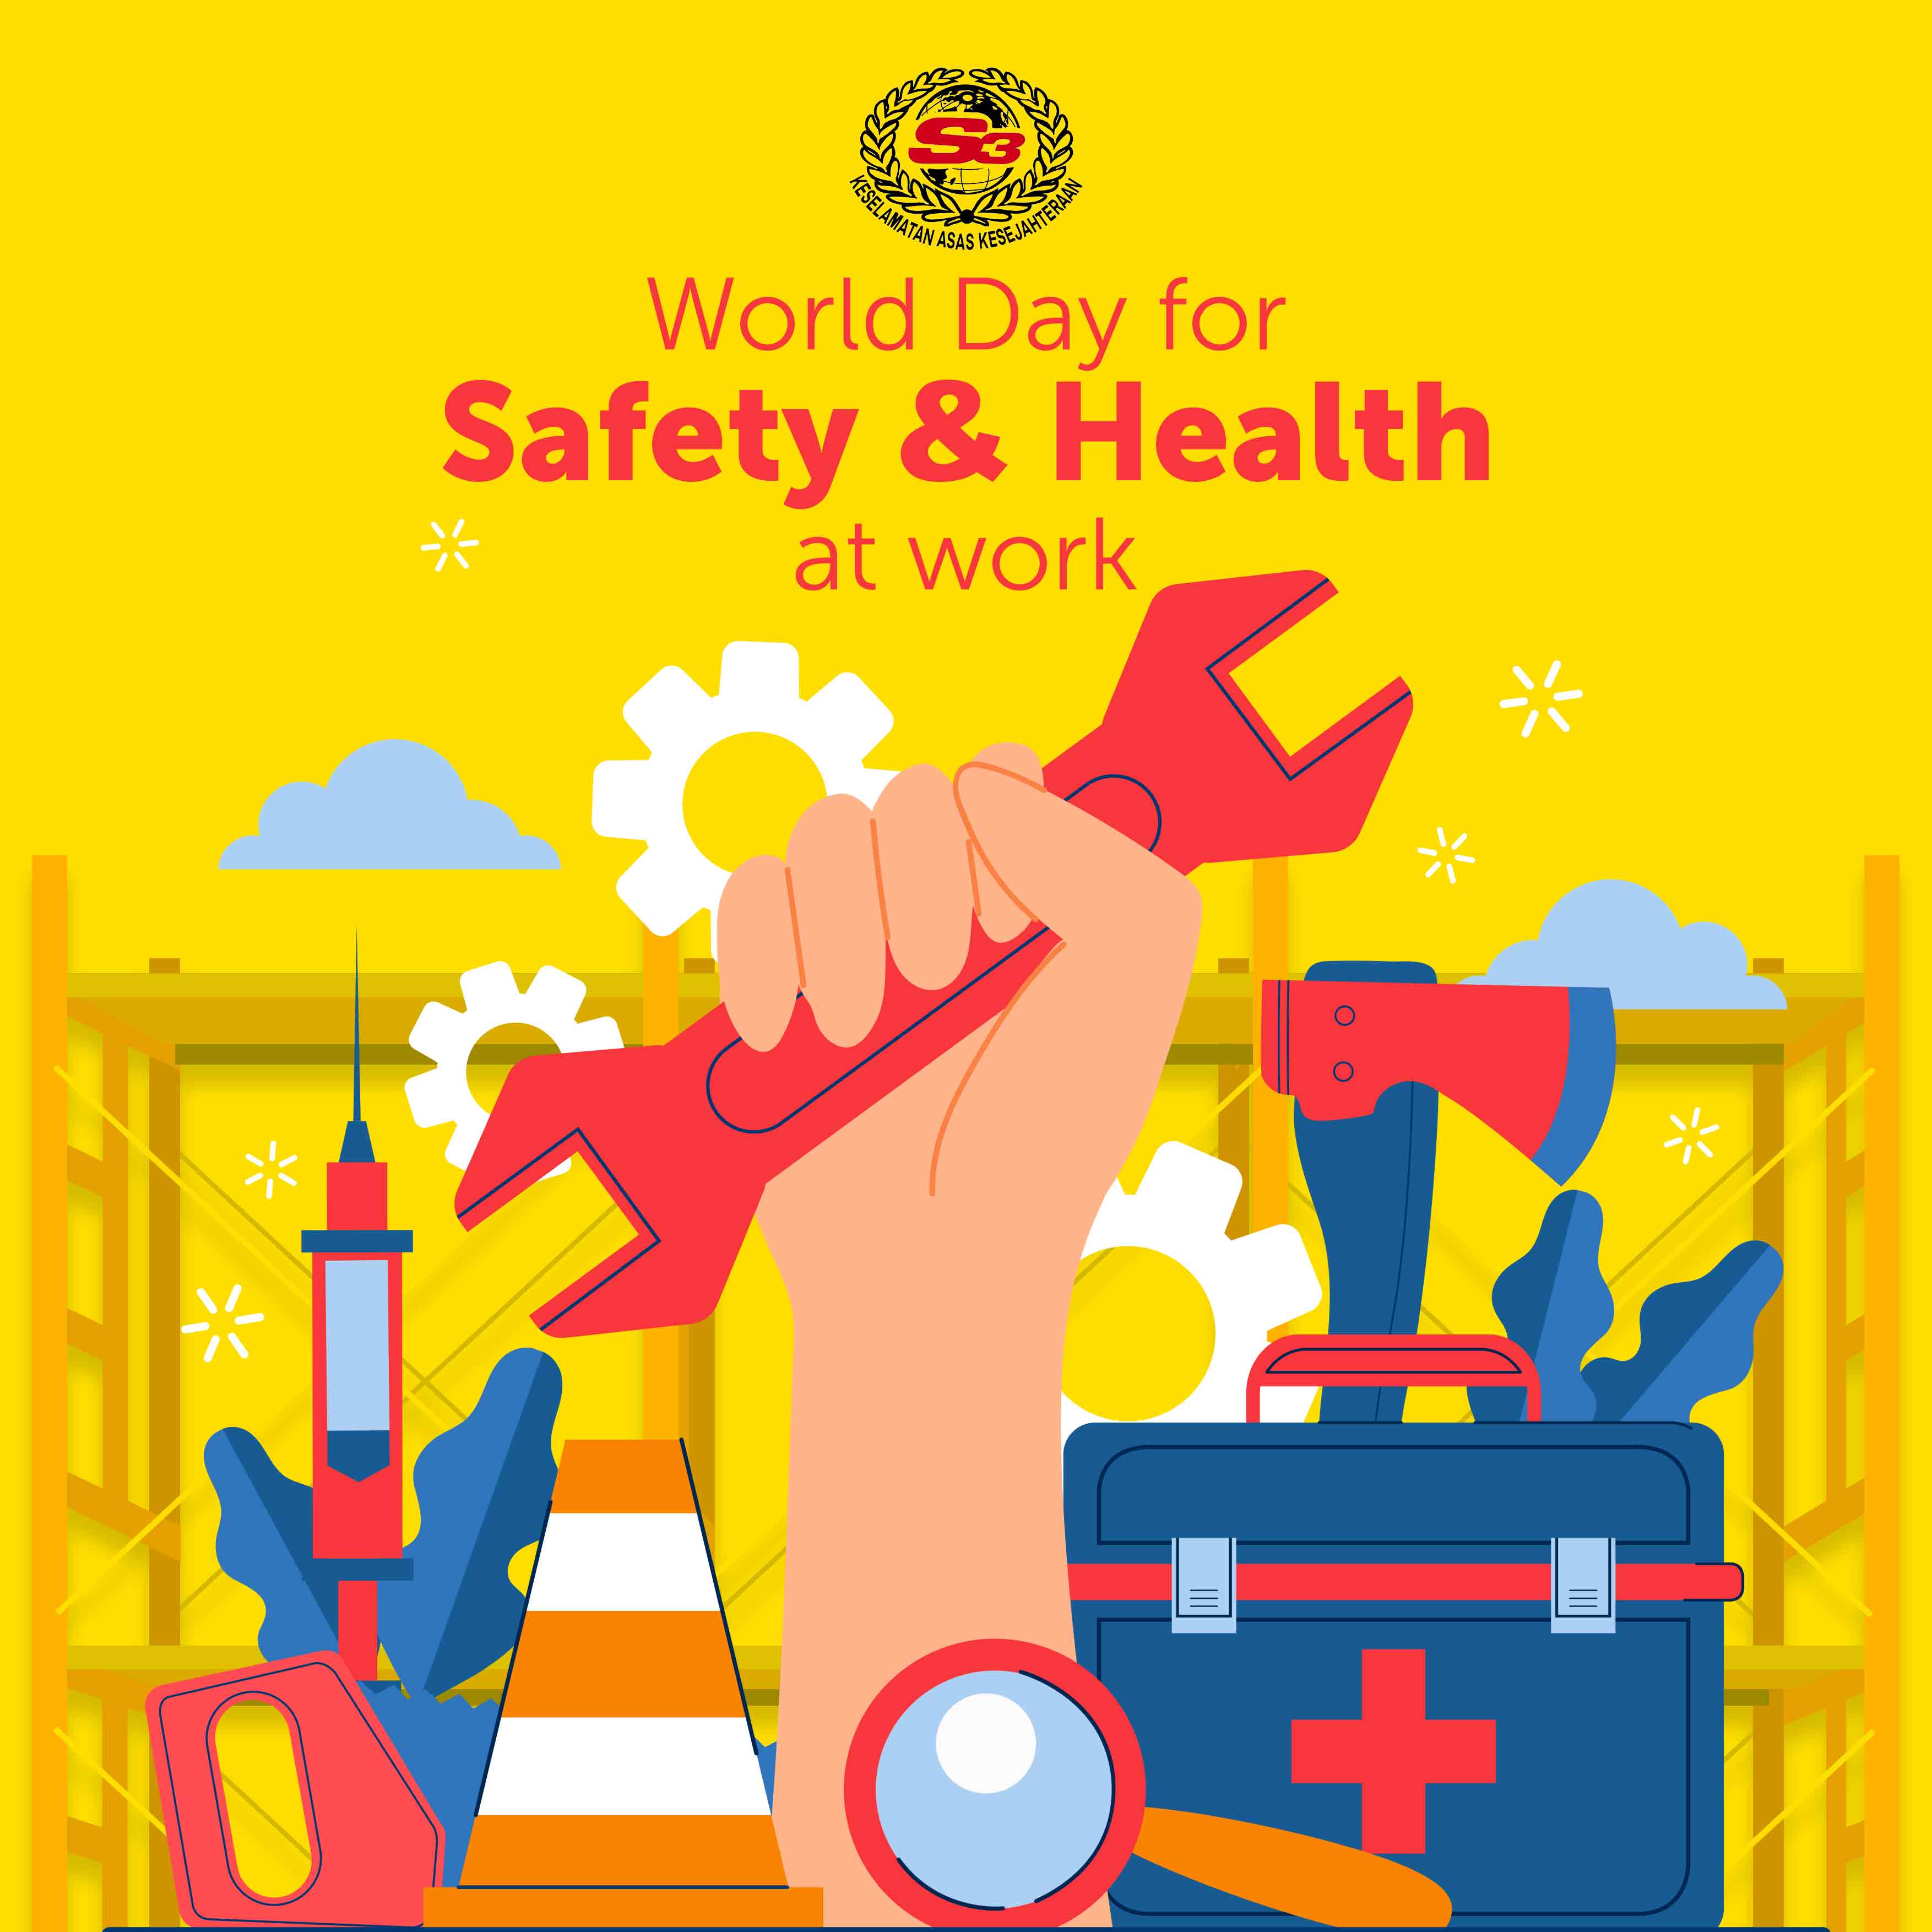 World Day for Safety and Health at Work - AEGIS Group Brunei